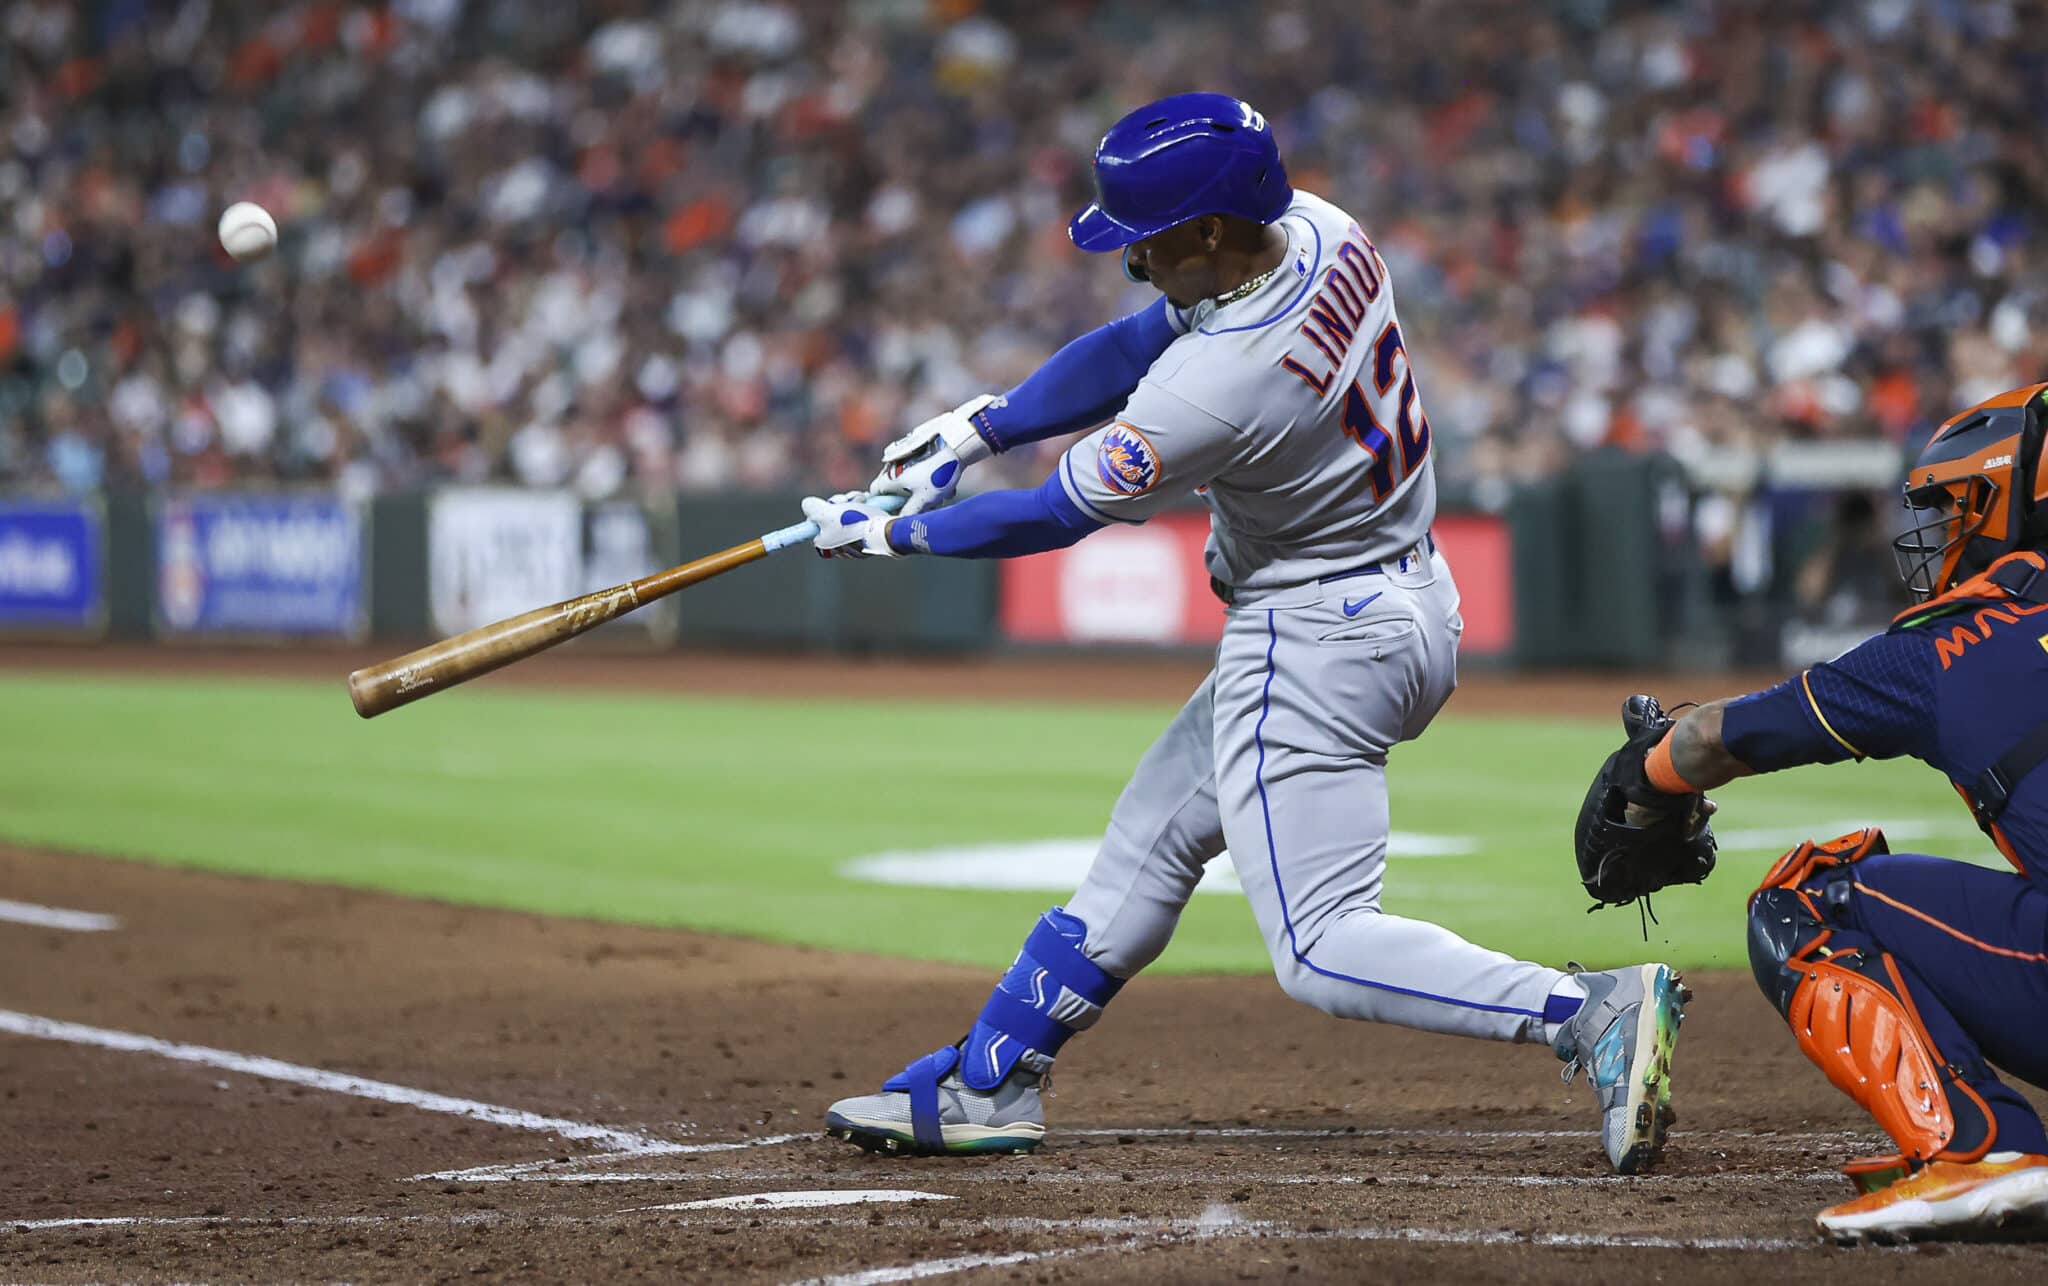 The key to Mets' Francisco Lindor's bat coming alive? Maybe it's his kid